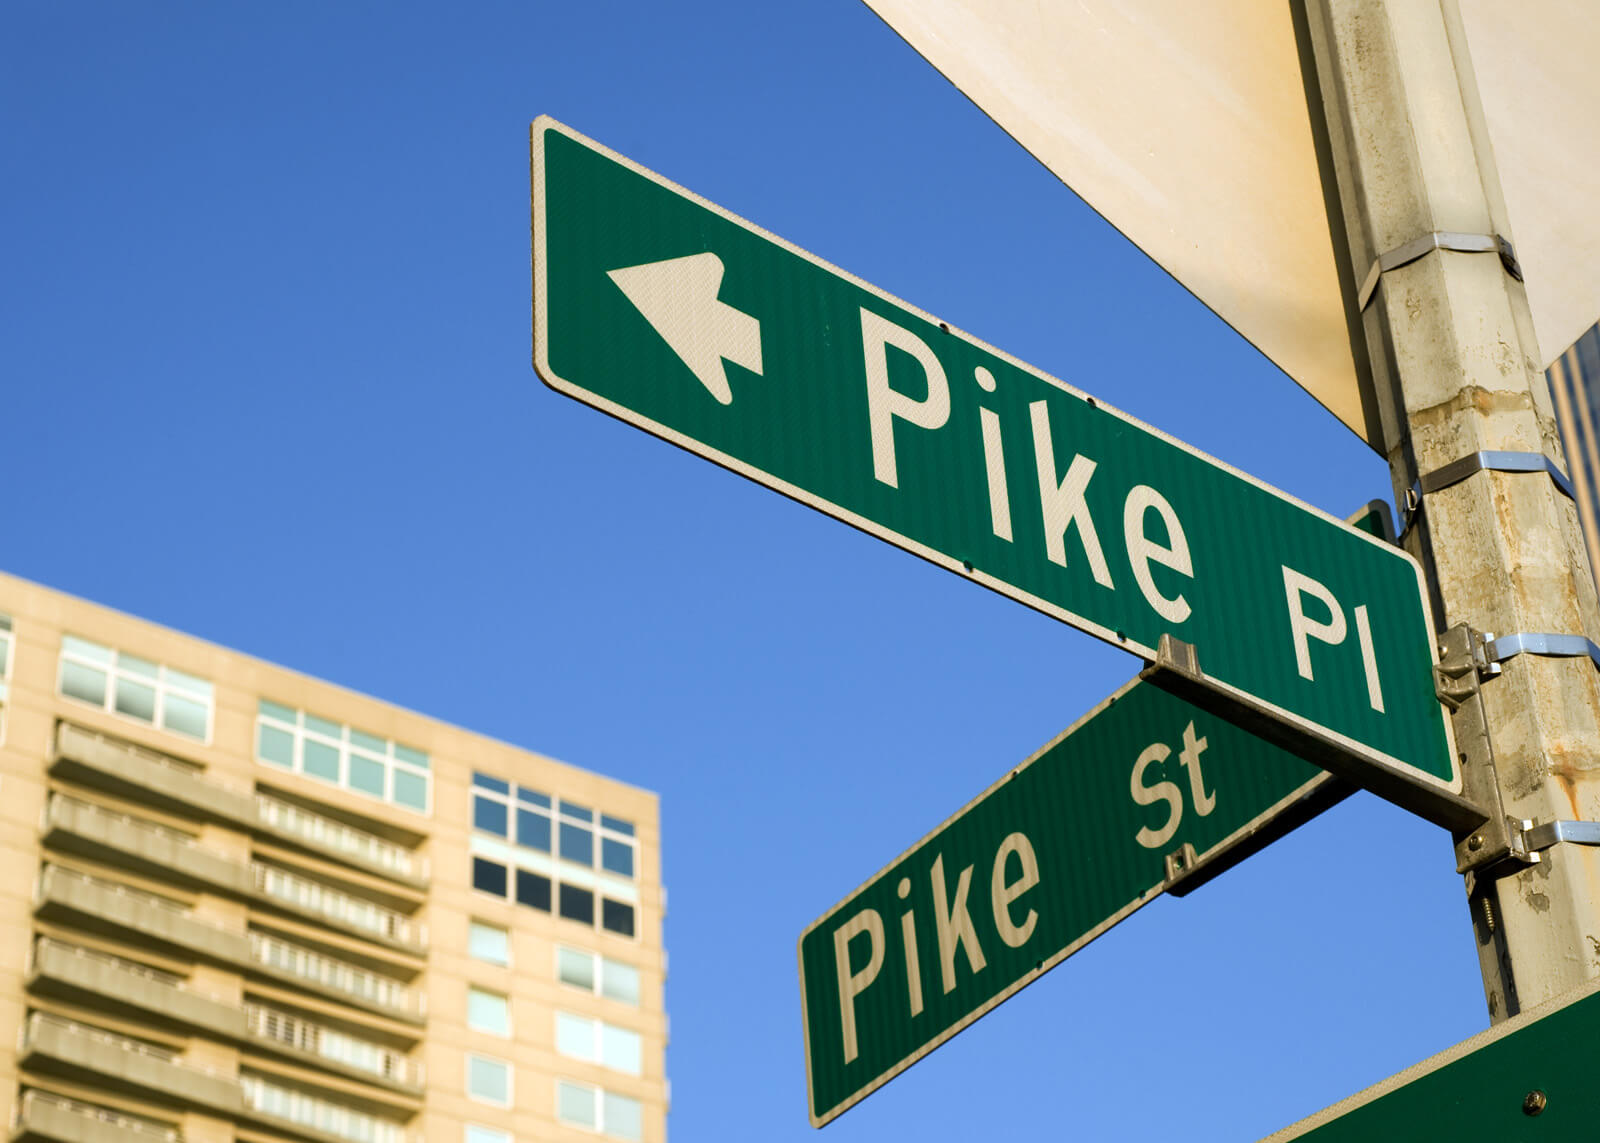 Pike Place street sign near famous Pike Place Maket in Seattle